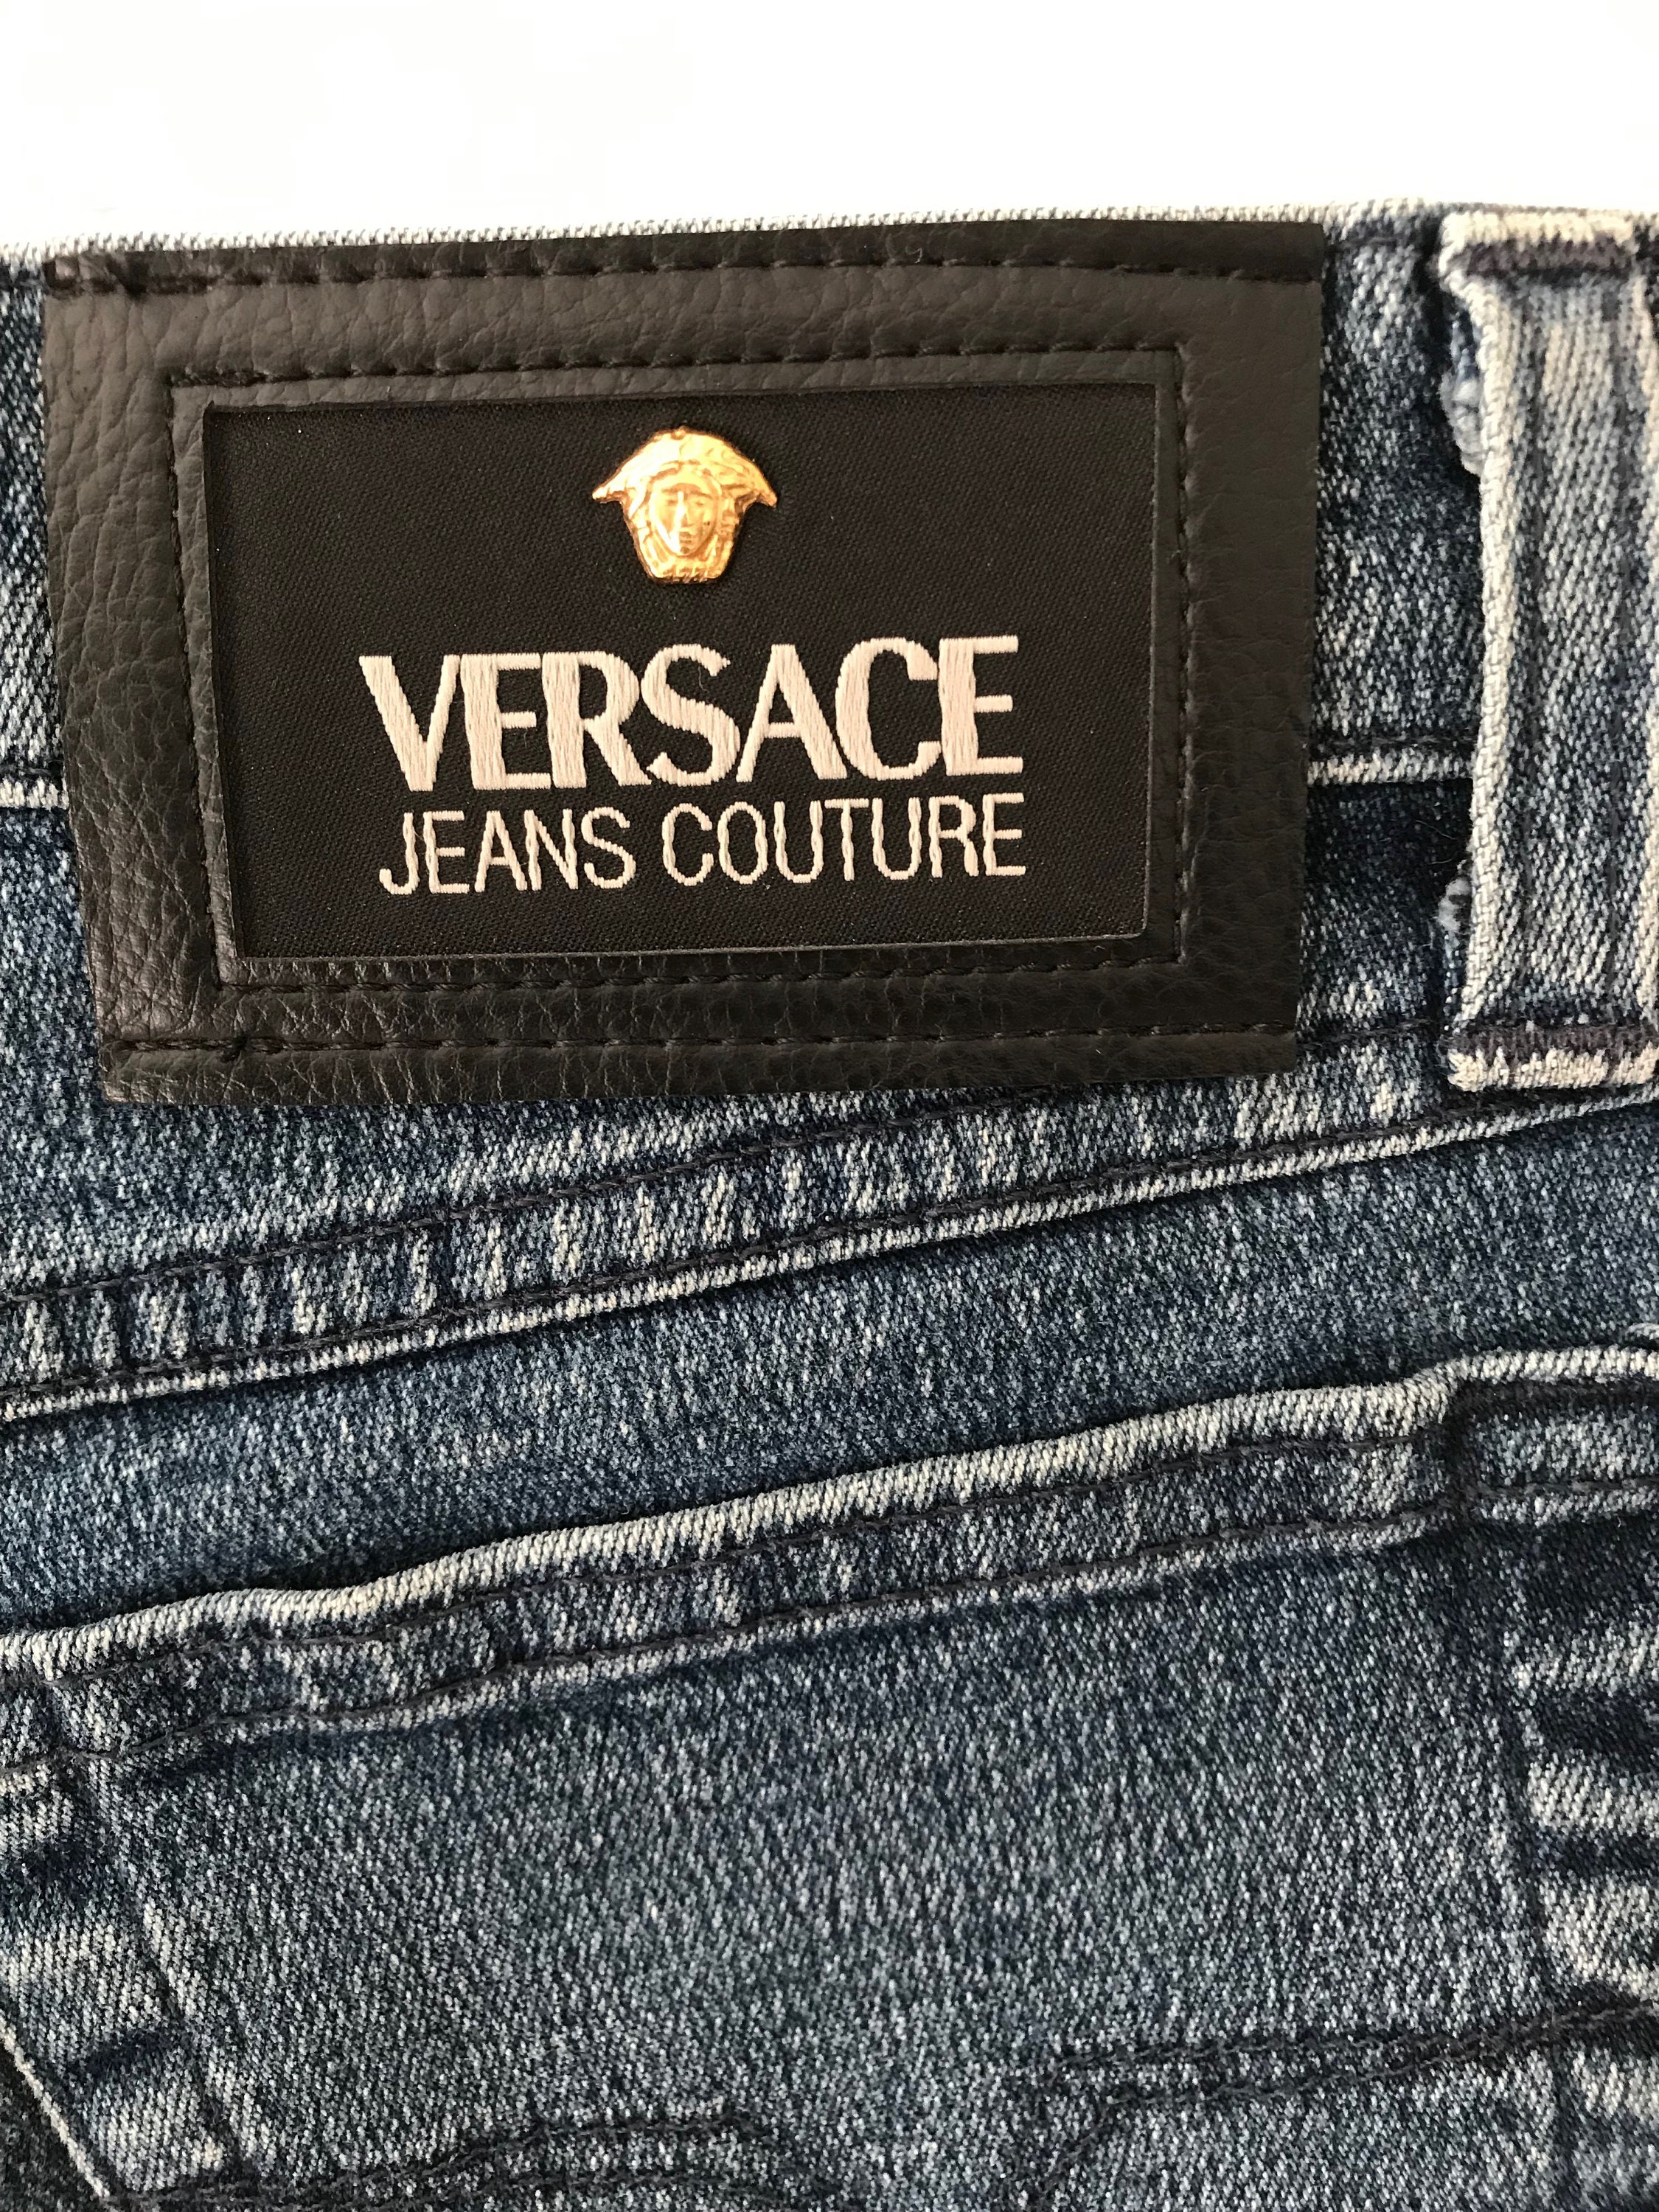 Vintage VERSACE JEANS Couture Jeans High Waisted Jeans High | Etsy